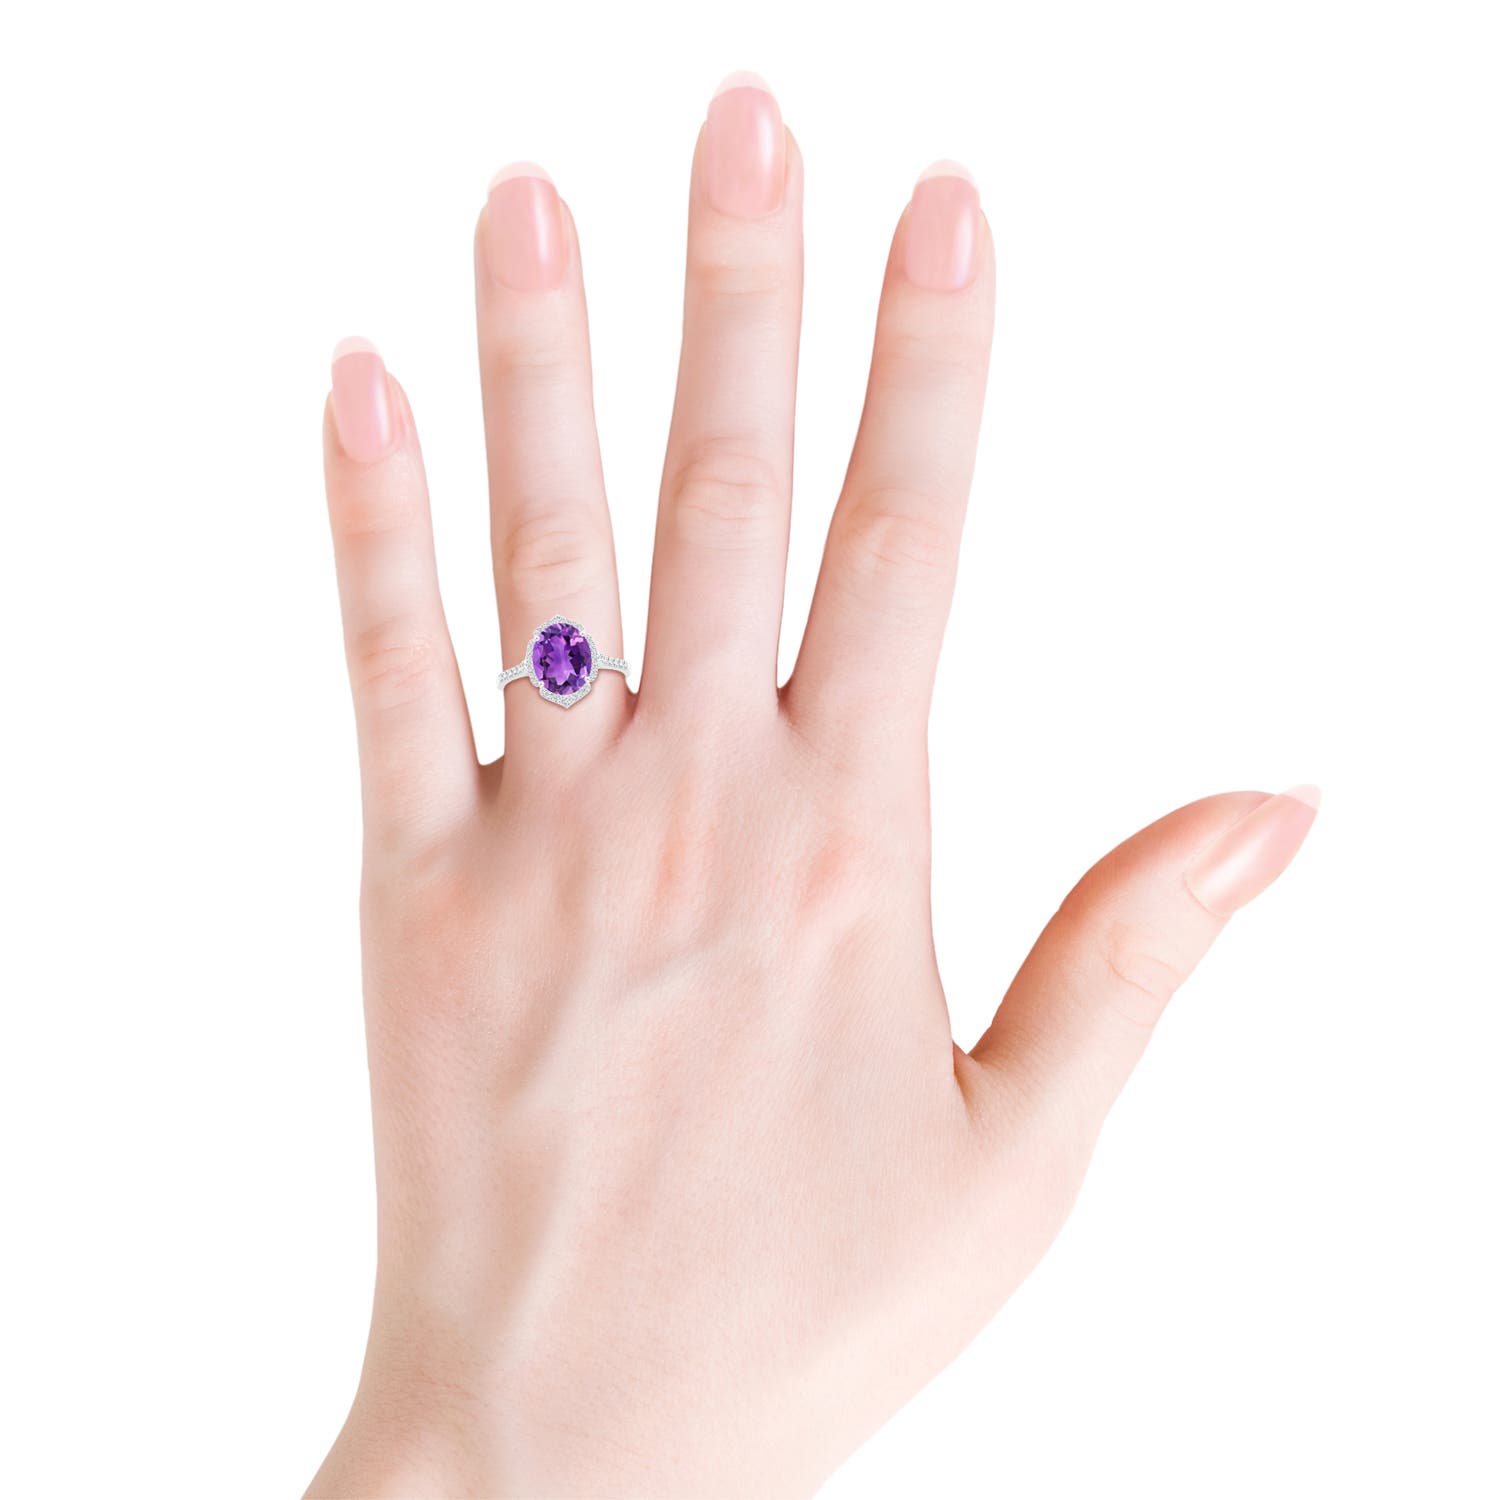 AAA - Amethyst / 2.51 CT / 14 KT White Gold